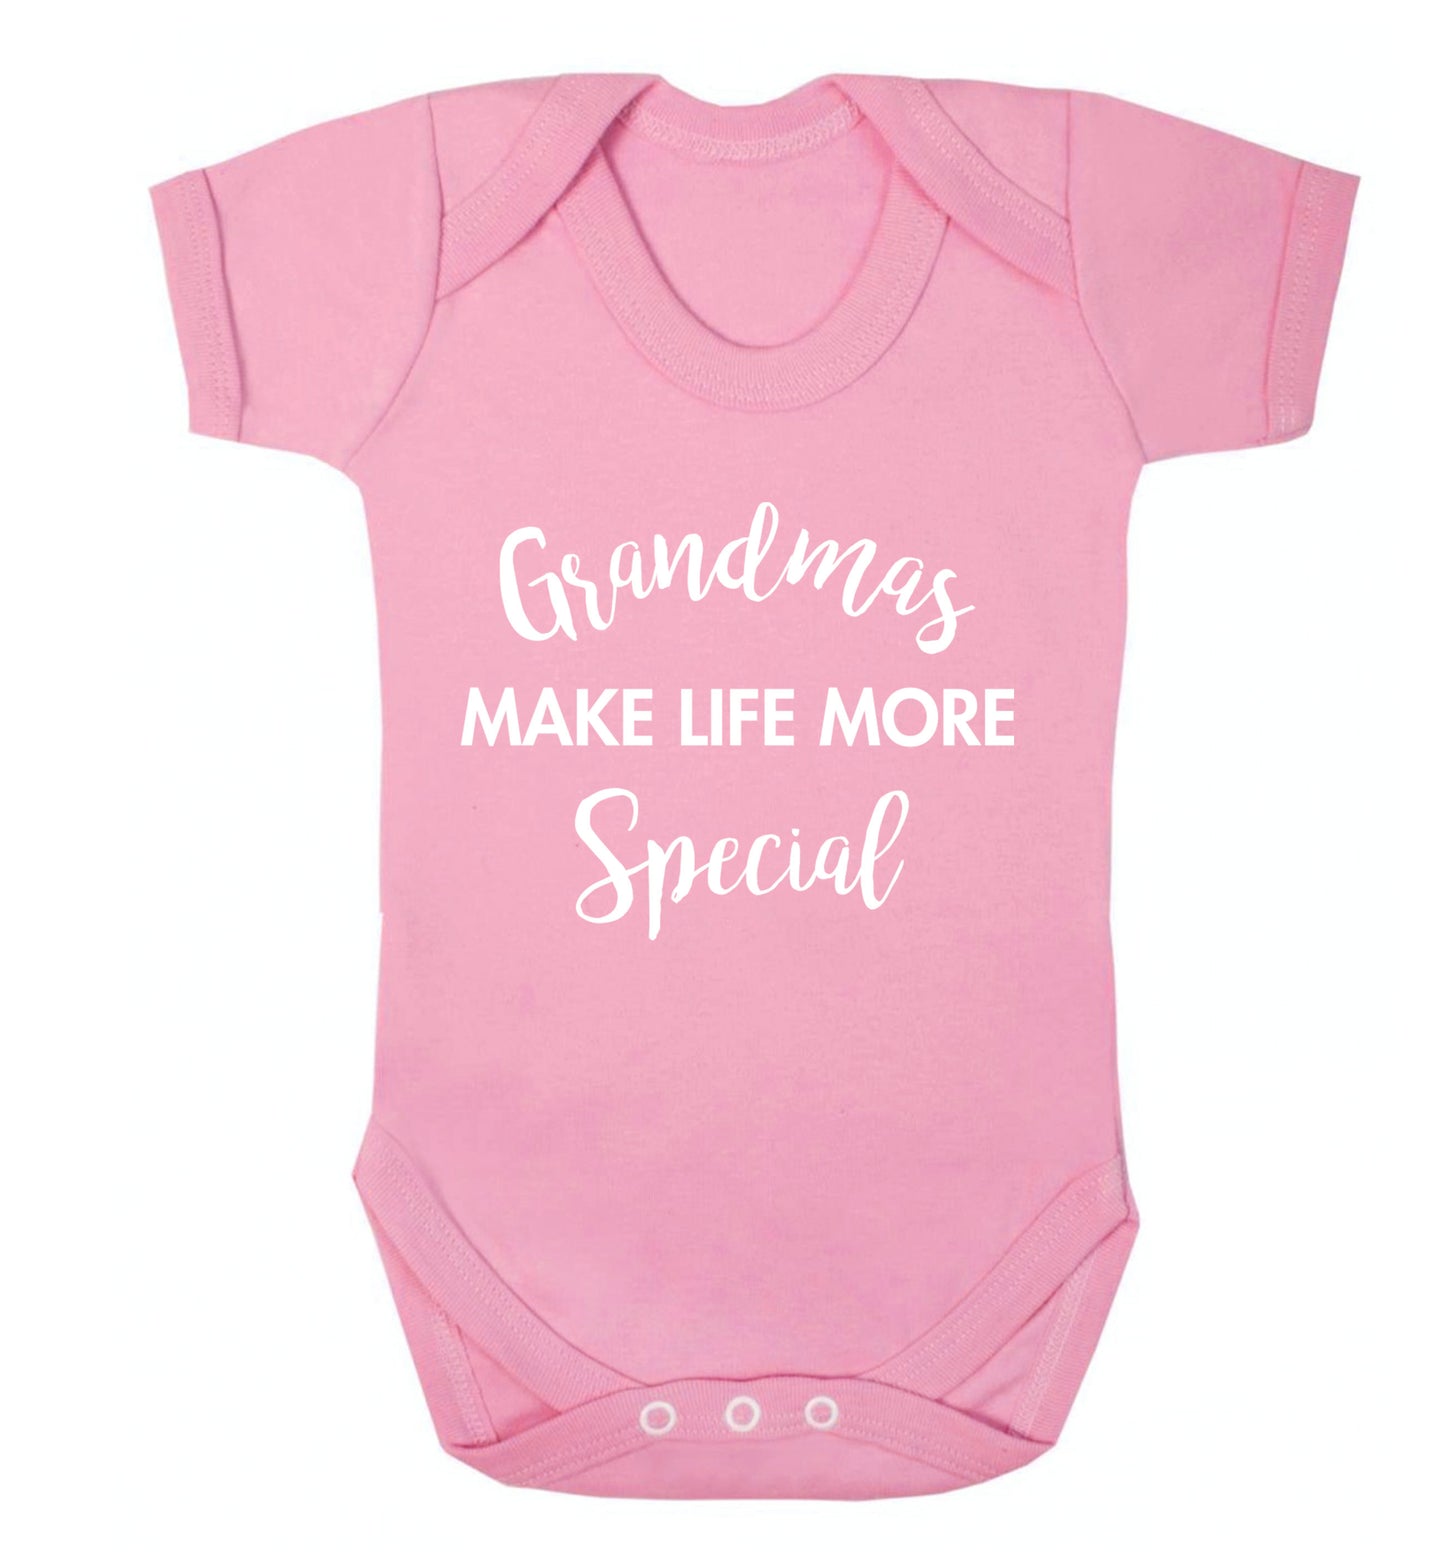 Grandmas make life more special Baby Vest pale pink 18-24 months